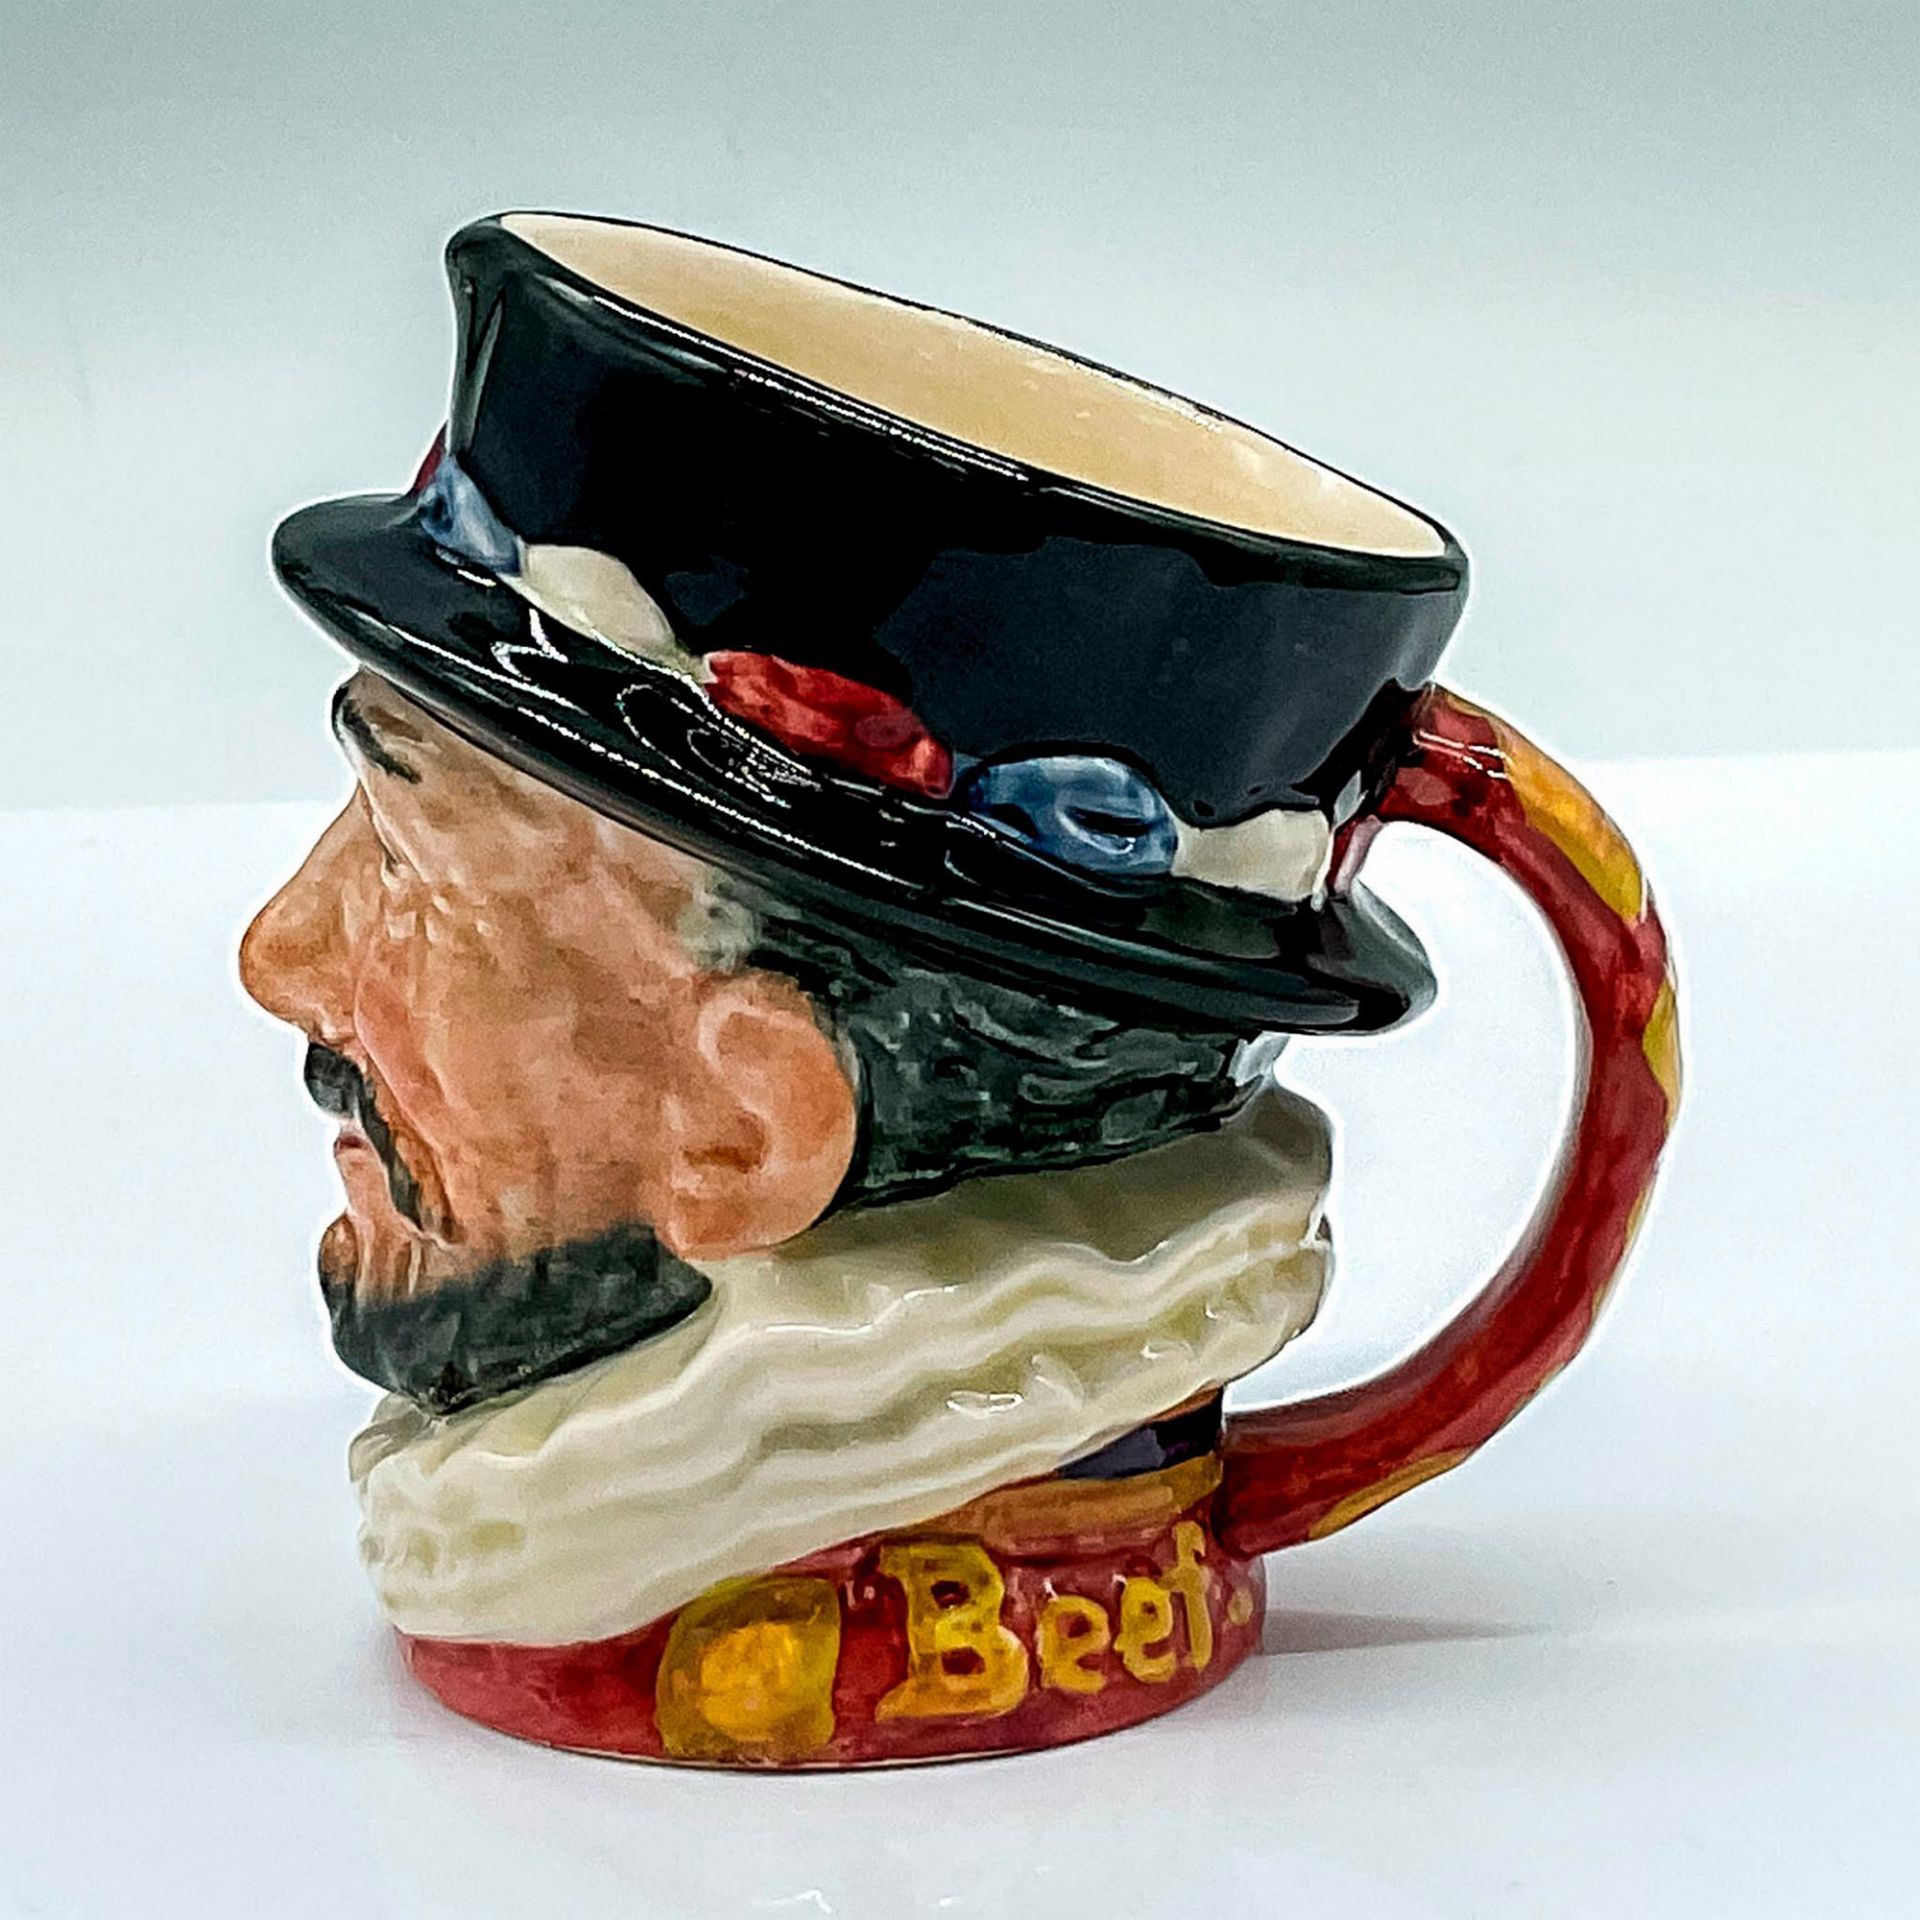 Beefeater GR D6233 - Small - Royal Doulton Character Jug - Image 2 of 5